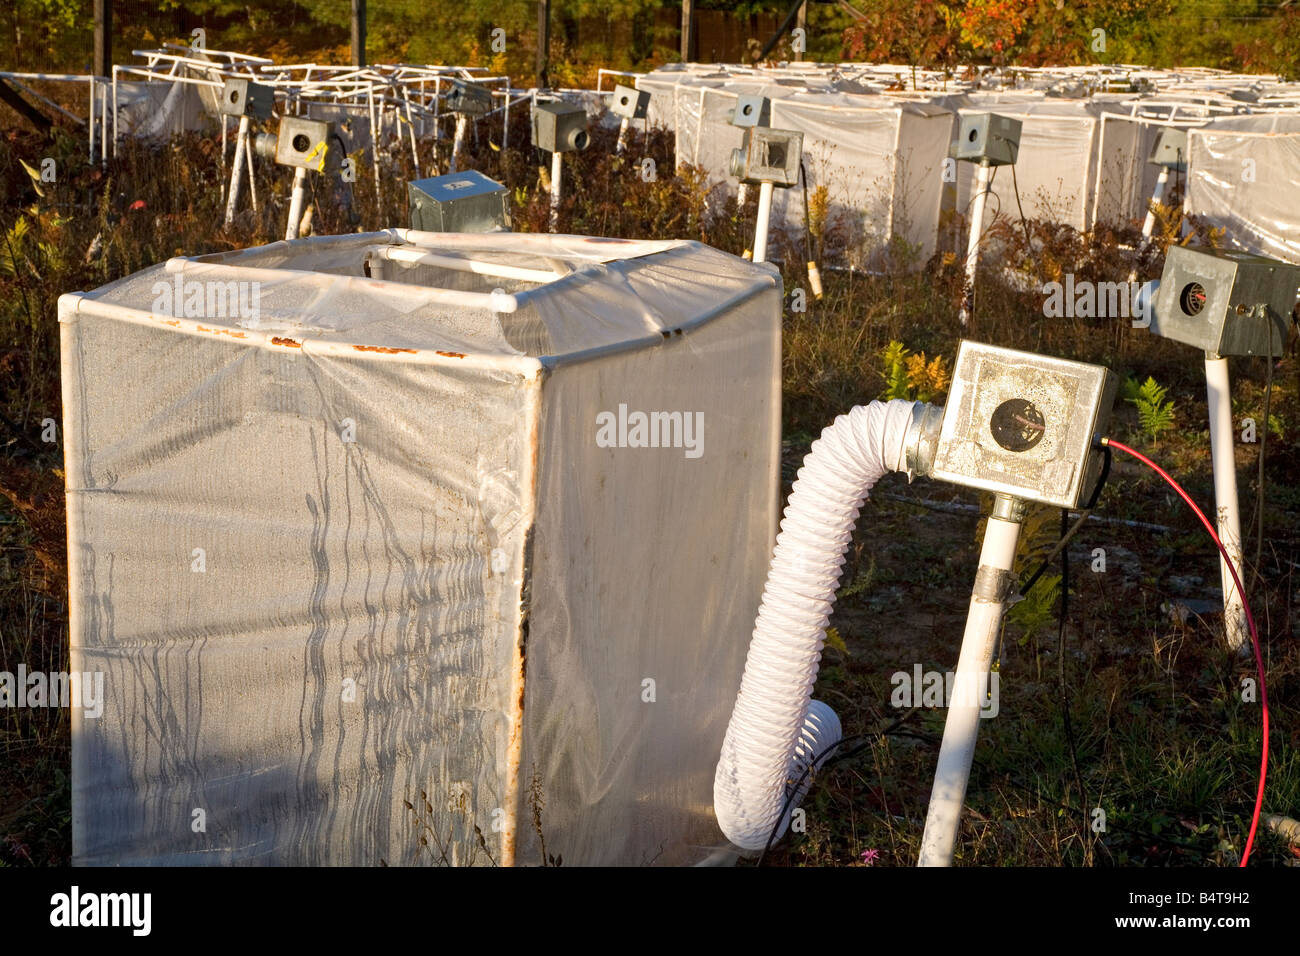 Climate Change Research Stockfoto